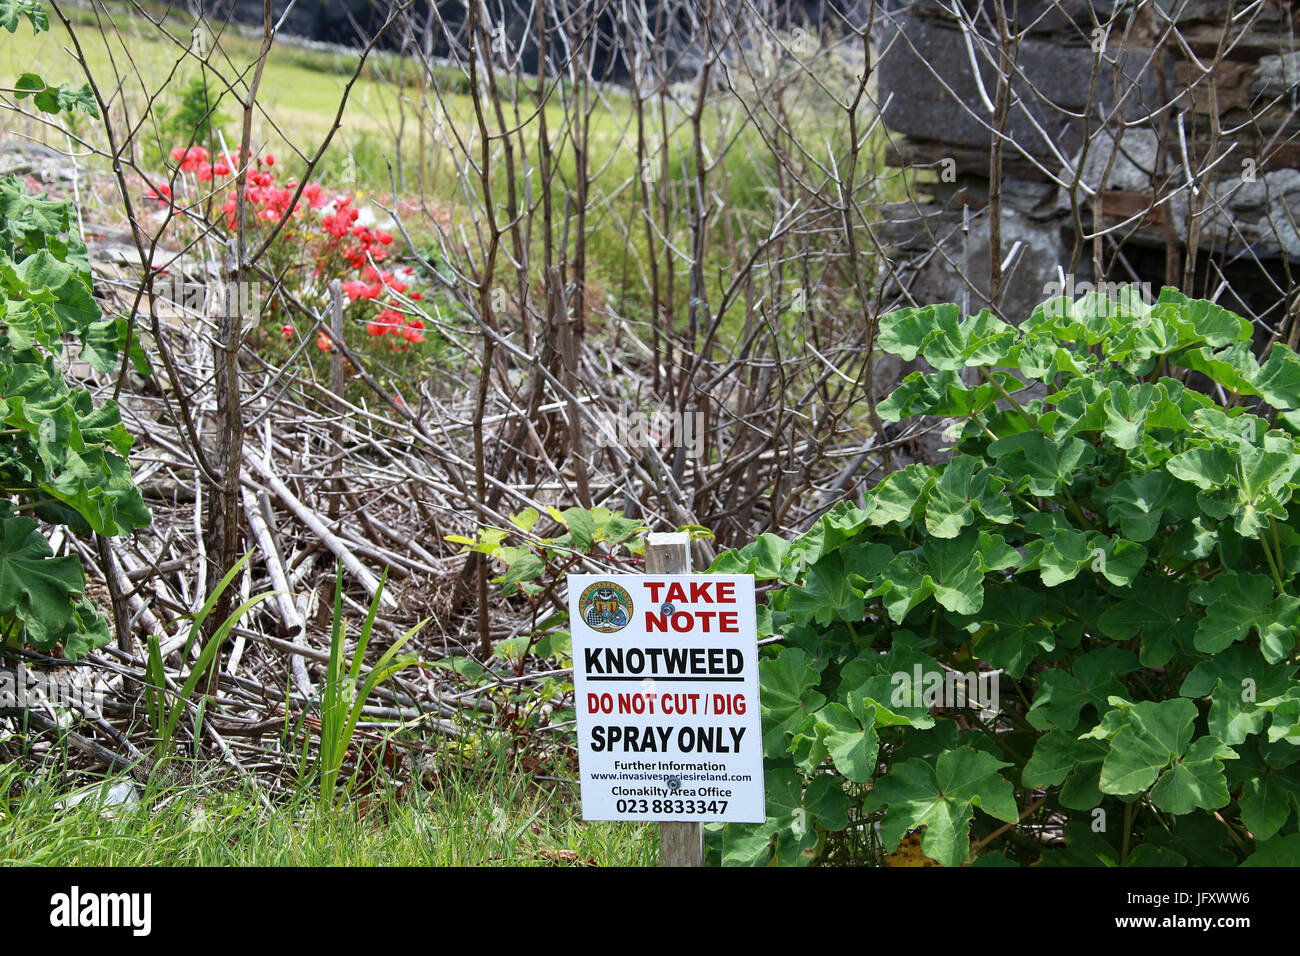 Treated knotweed plants and warning sign in the Republic of Ireland Stock Photo